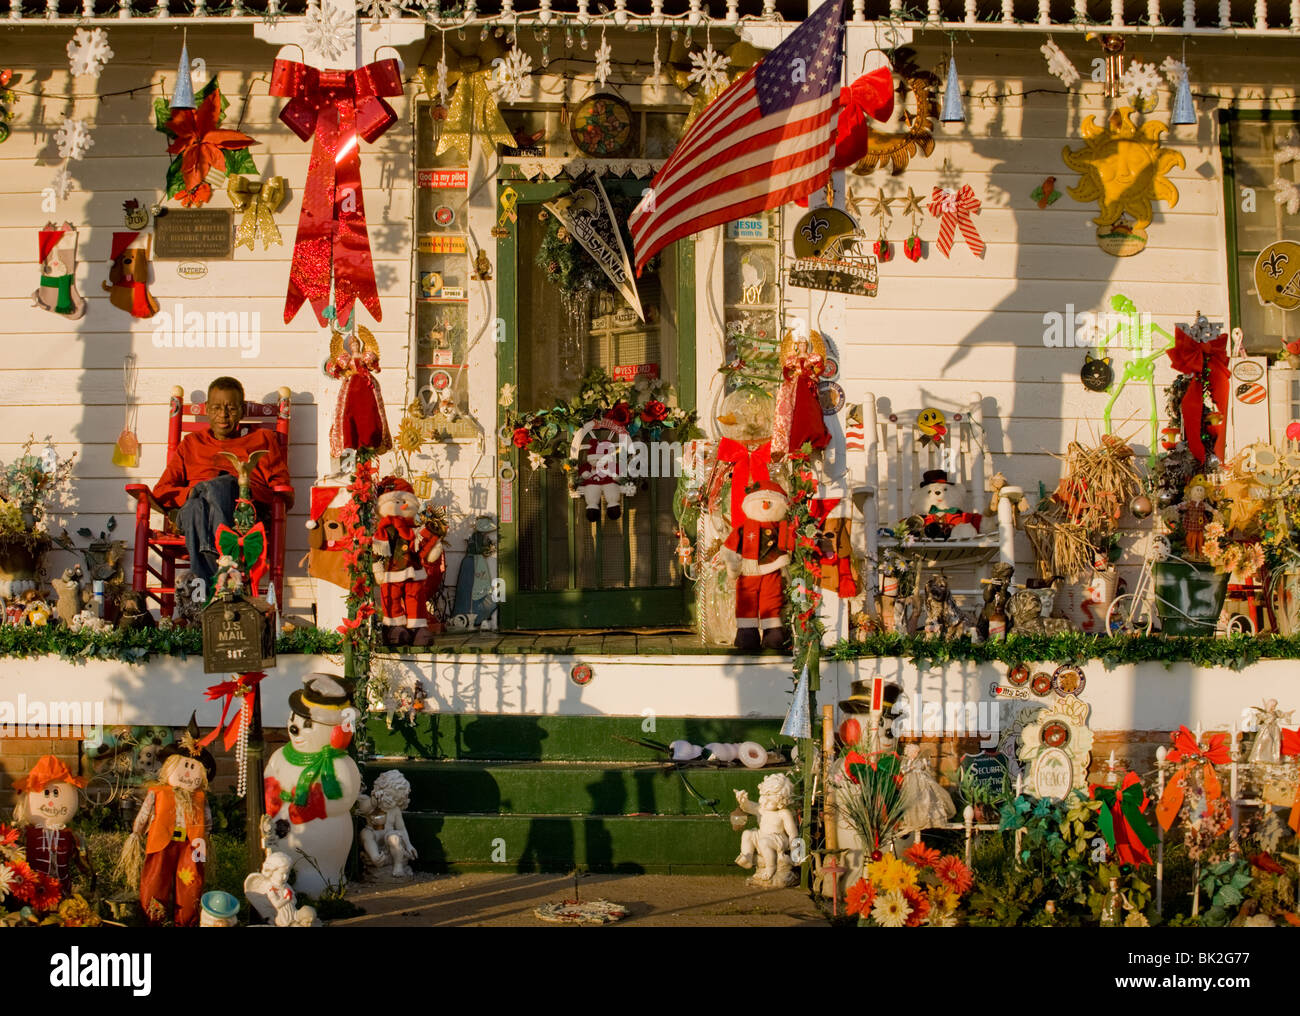 Man on his porch with Christmas decorations, Natchez, Mississippi Stock Photo